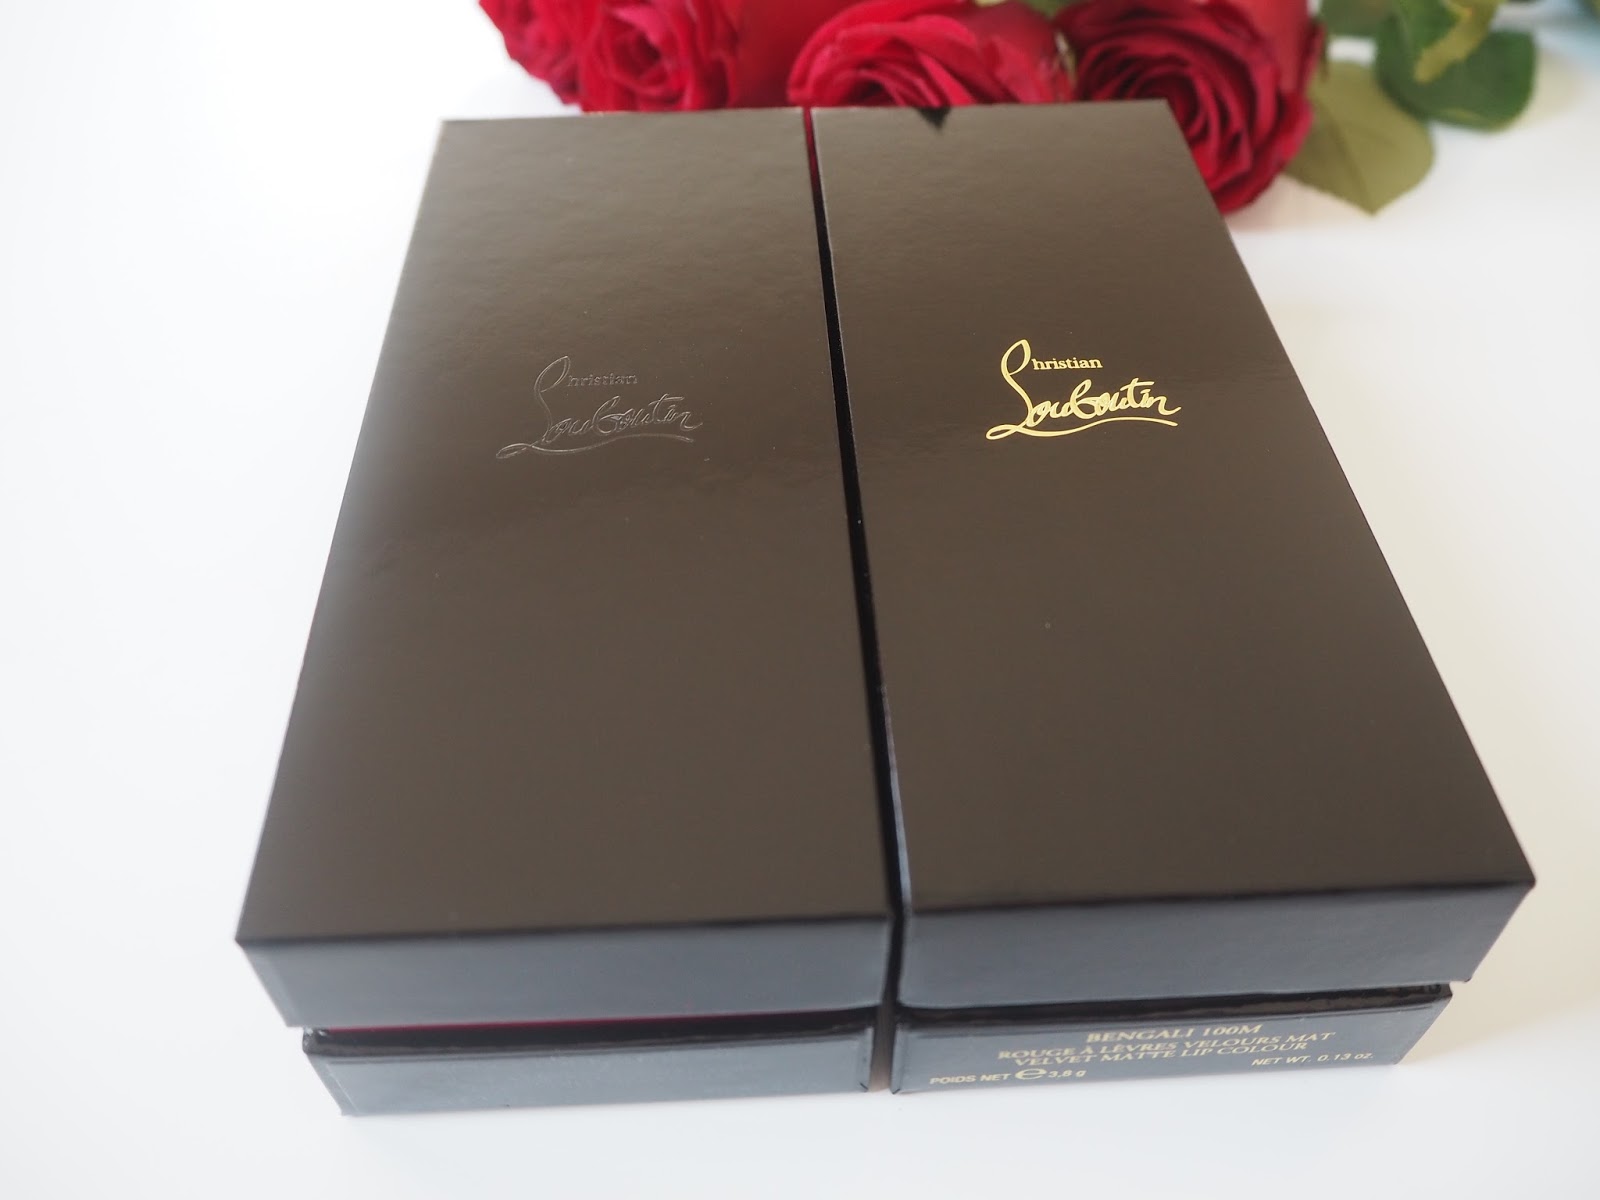 Christian Louboutin Lipsticks review-Rouge Louboutin Sheer Voile